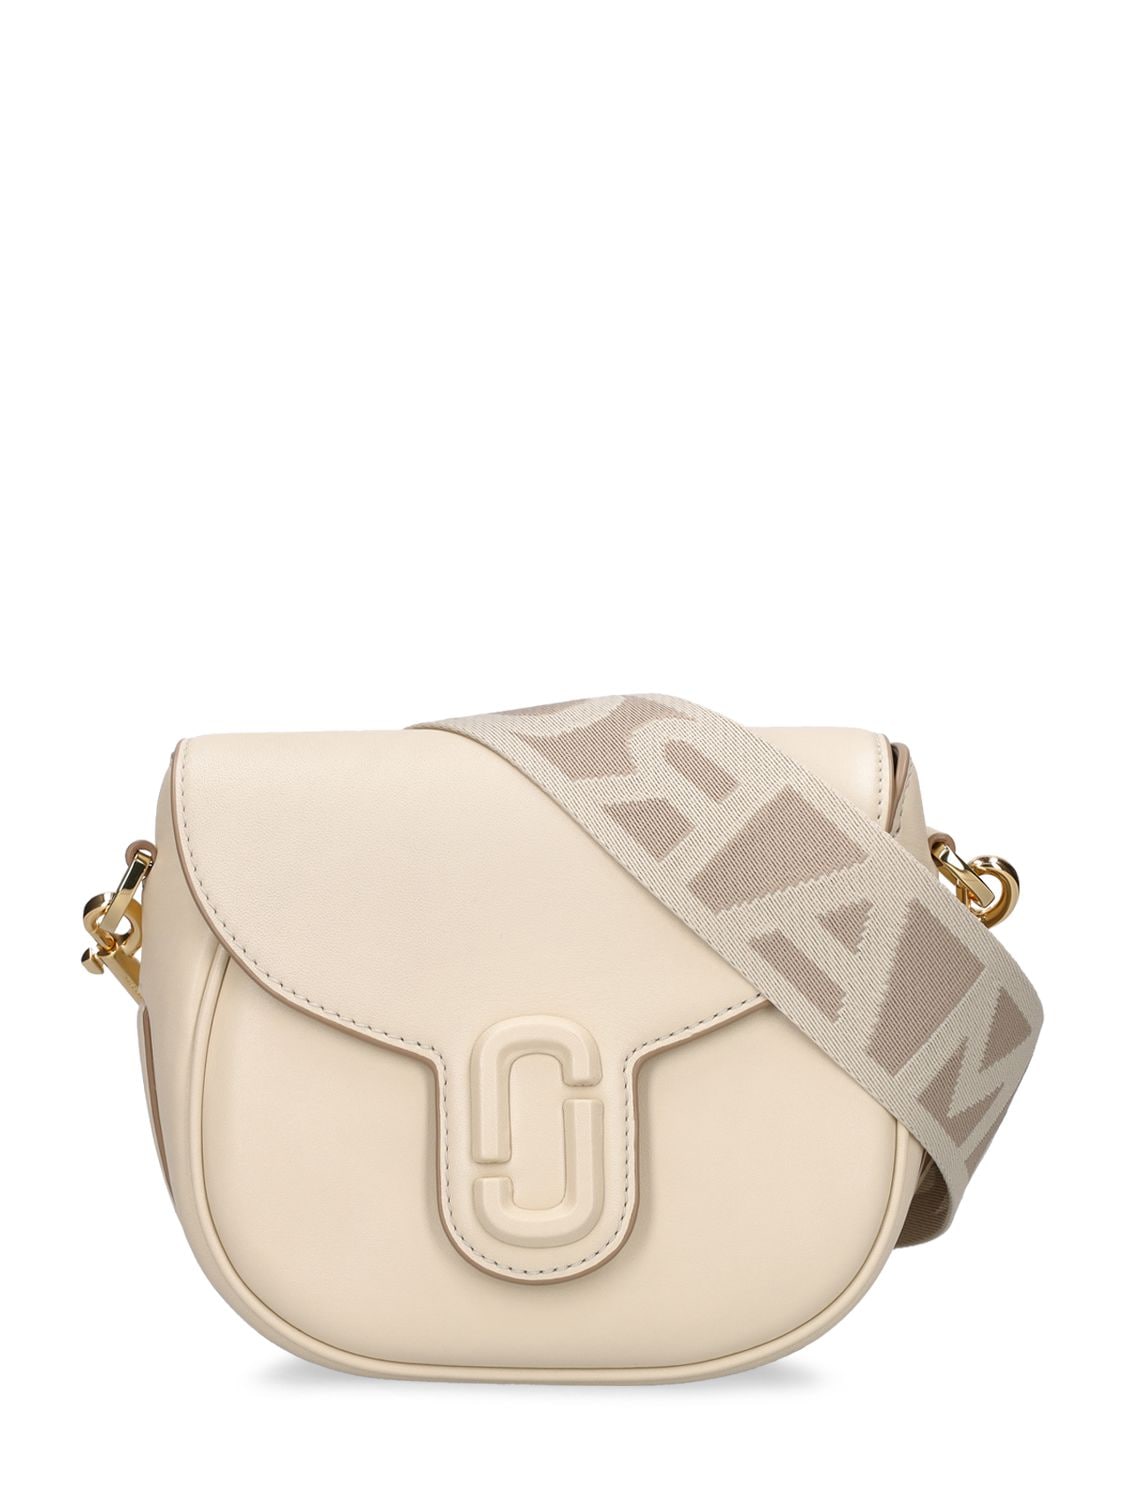 Marc Jacobs Small Saddle Shoulder Bag In Cloud White